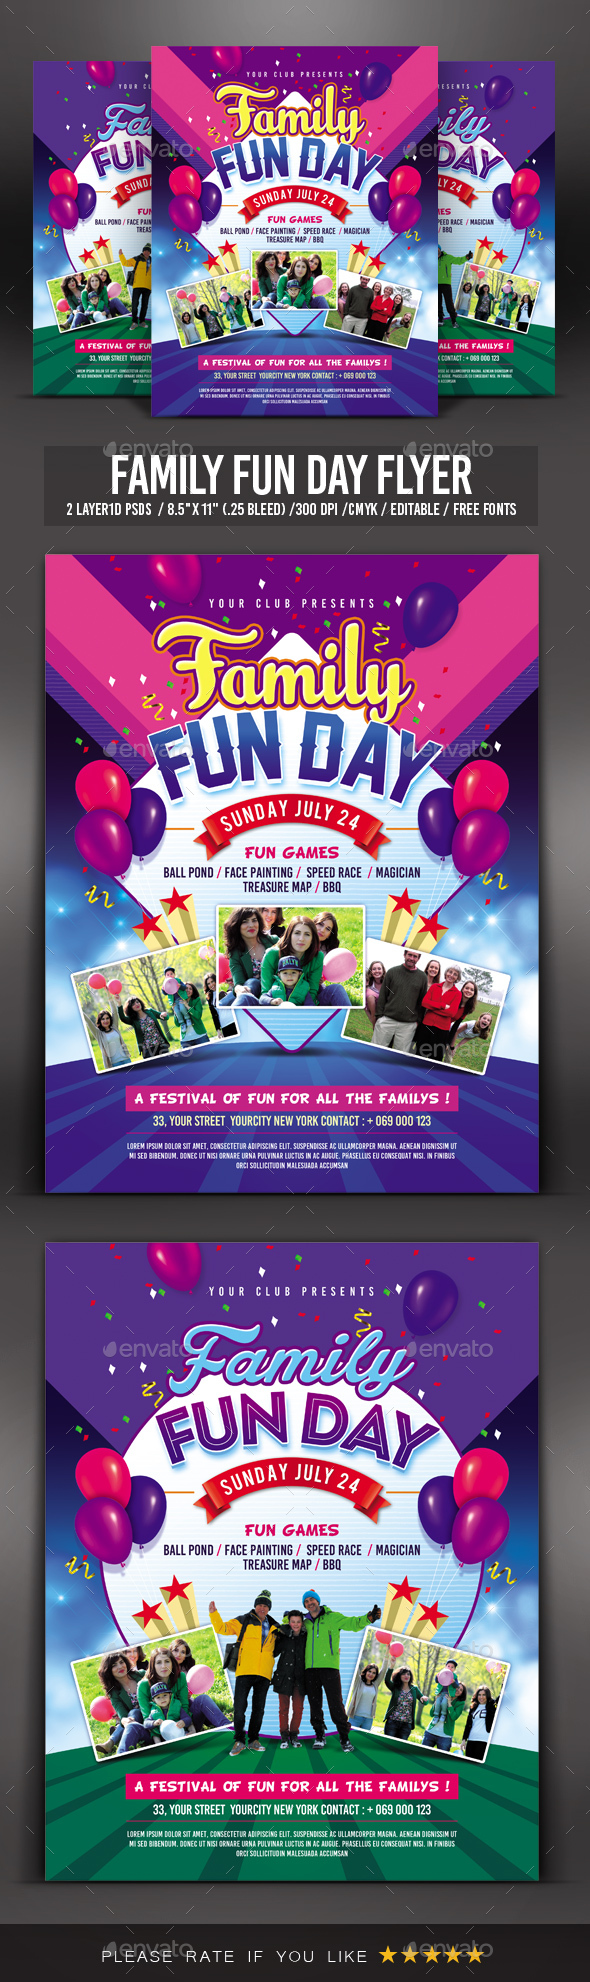 Family Fun Day Flyer By Pixelyes Graphicriver